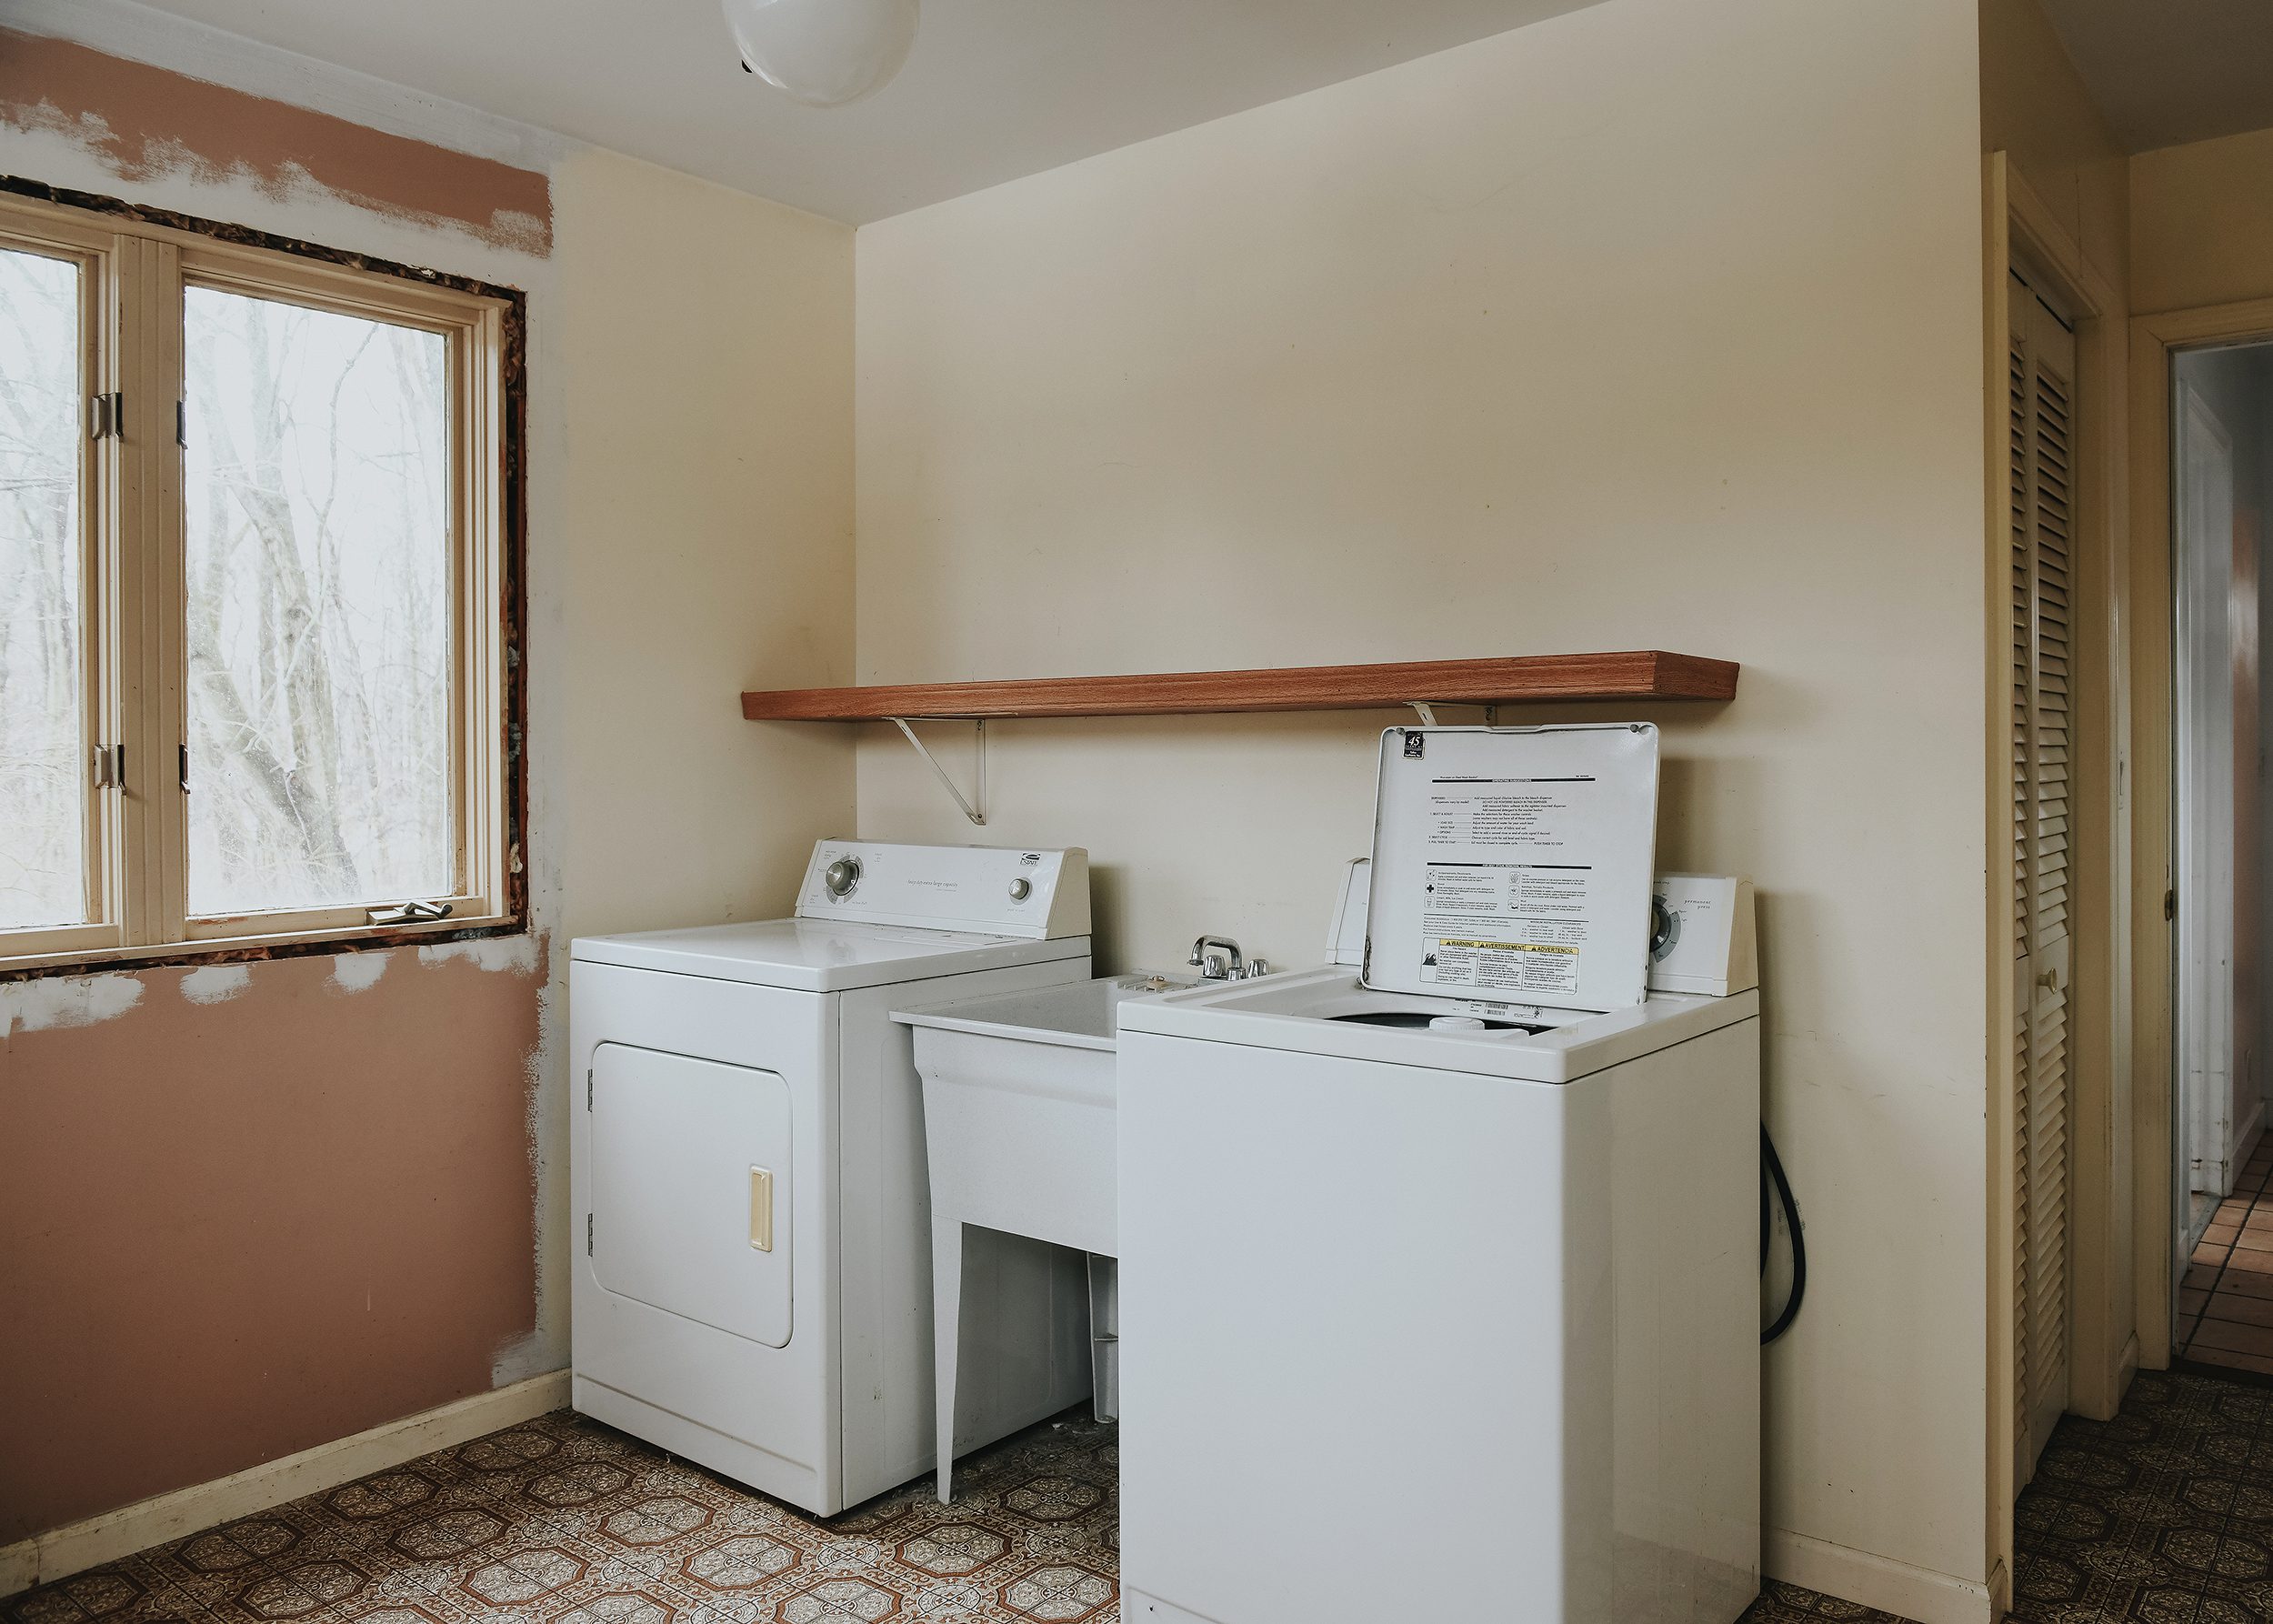 The Red House's current laundry room/future second bedroom // via Yellow Brick Home